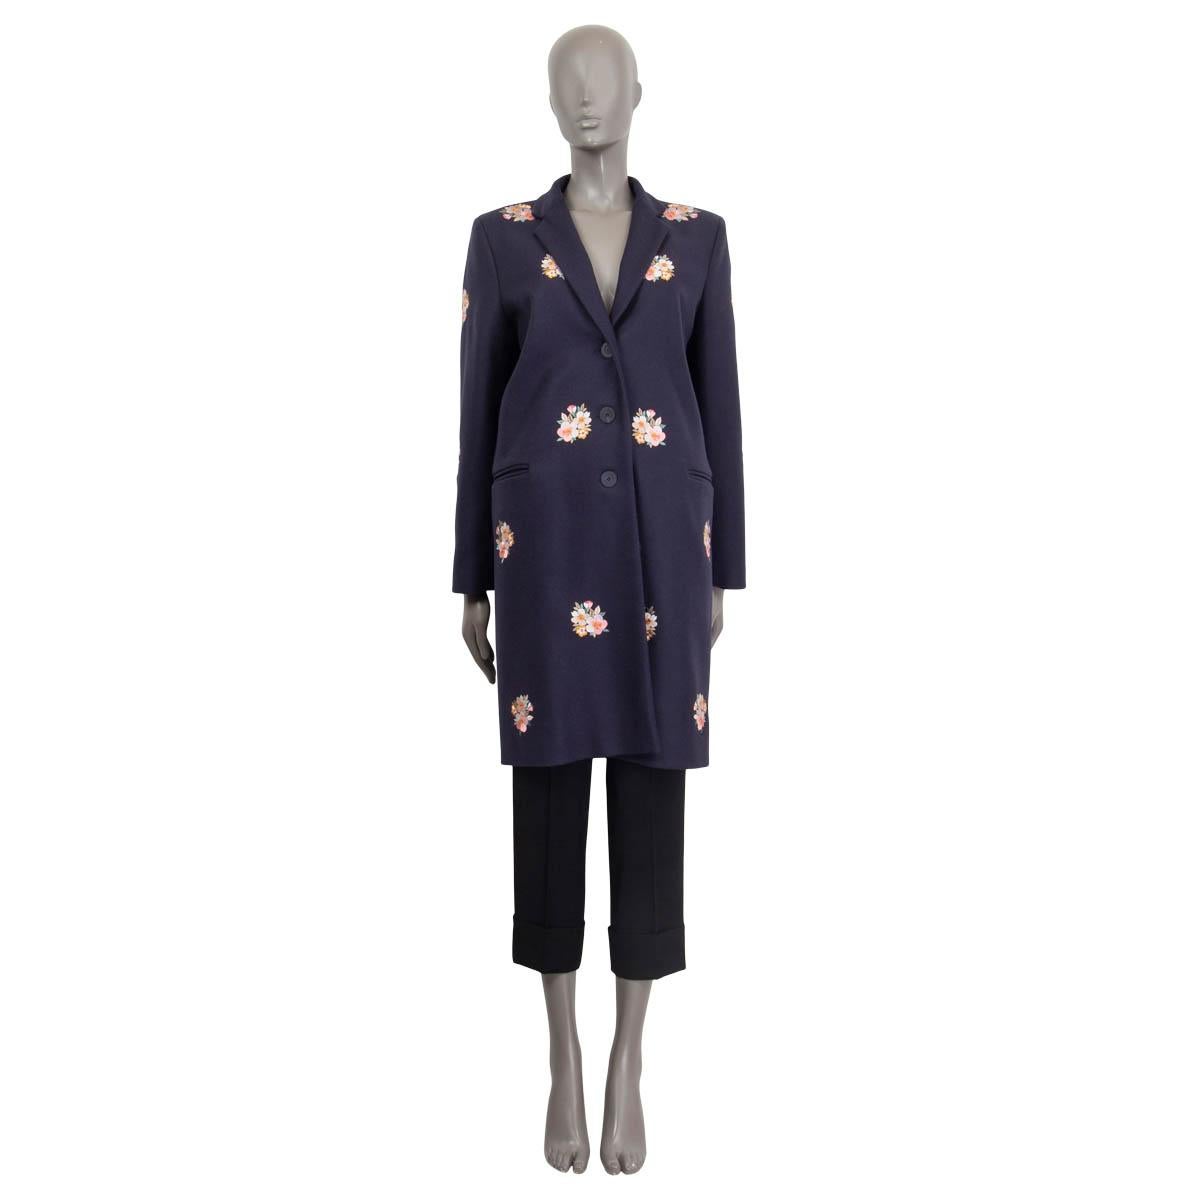 100% authentic Vilshenko flower embroiderer coat in midnight blue virgin wool (50%) and camel (50%). Features a high collar and two slit pockets on the front. Opens with three buttons on the front. Lined in midnight blue viscose (59%) and cotton